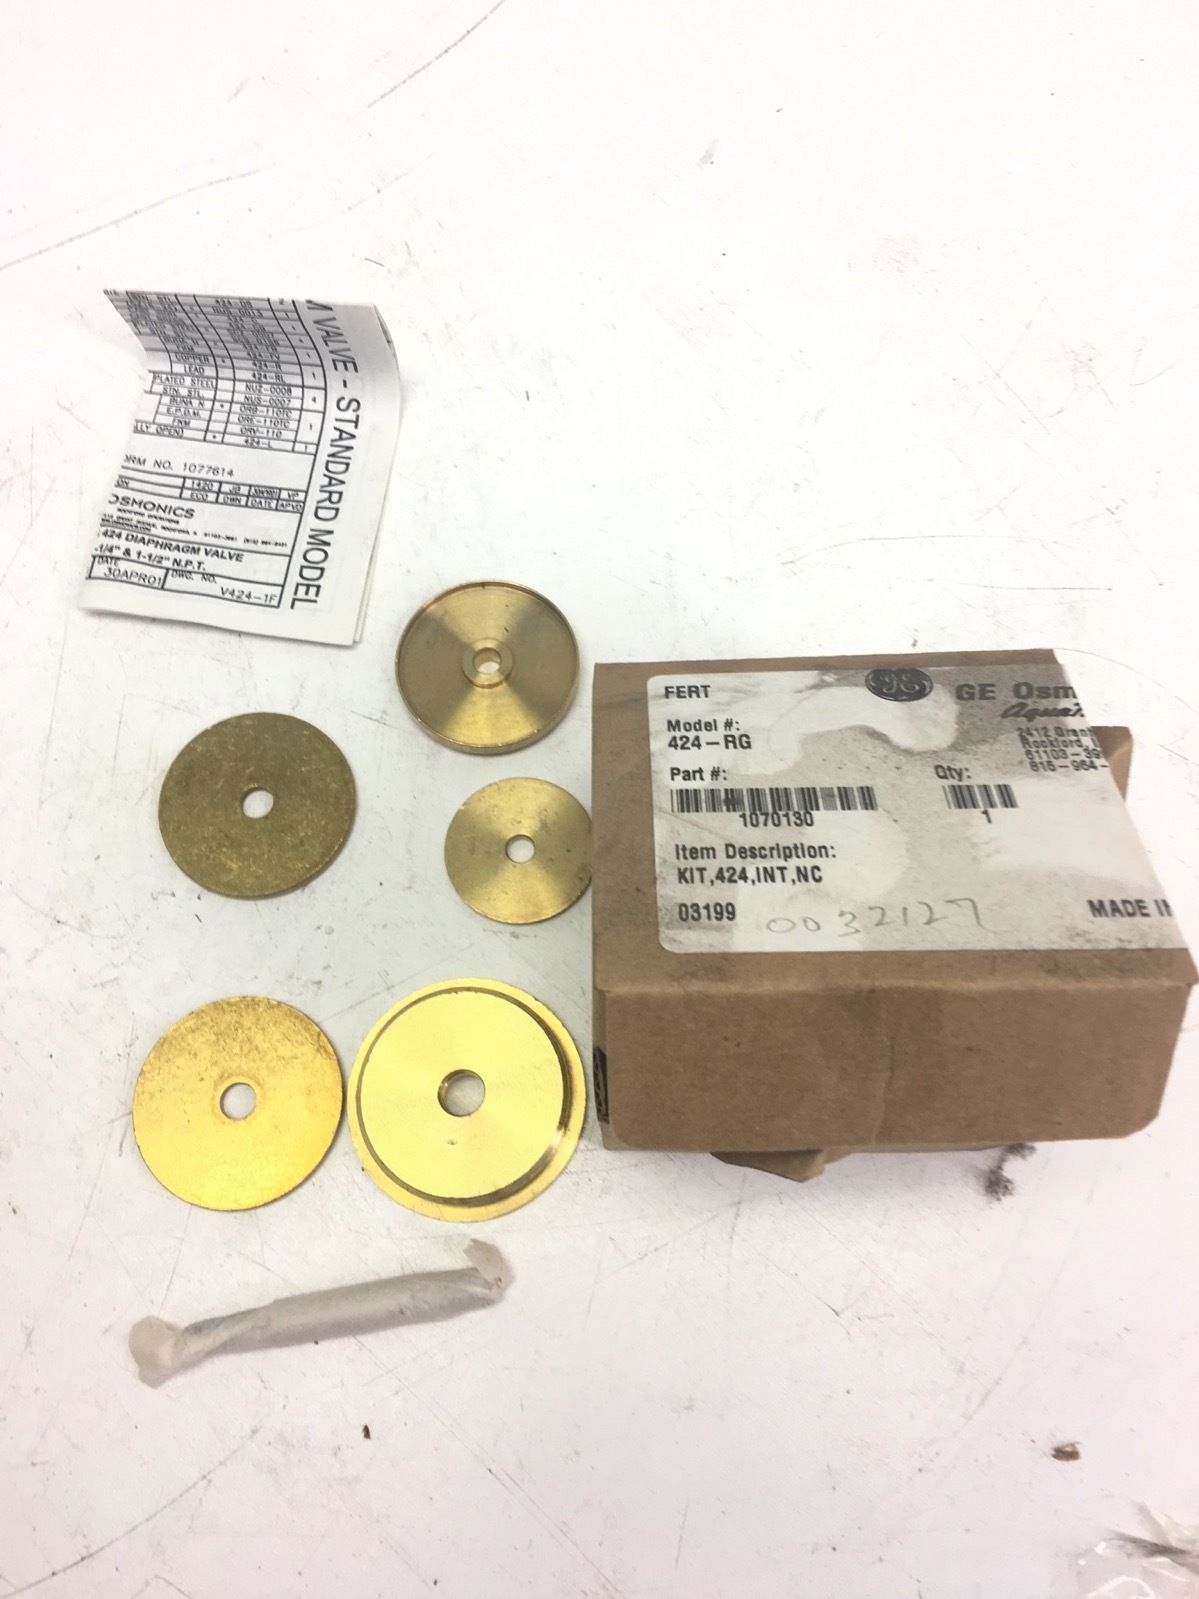 NEW IN BOX Aquamatic Â 424-RG Â INTERNAL PARTS KIT, NORMALLY CLOSED VALVES, F230 1